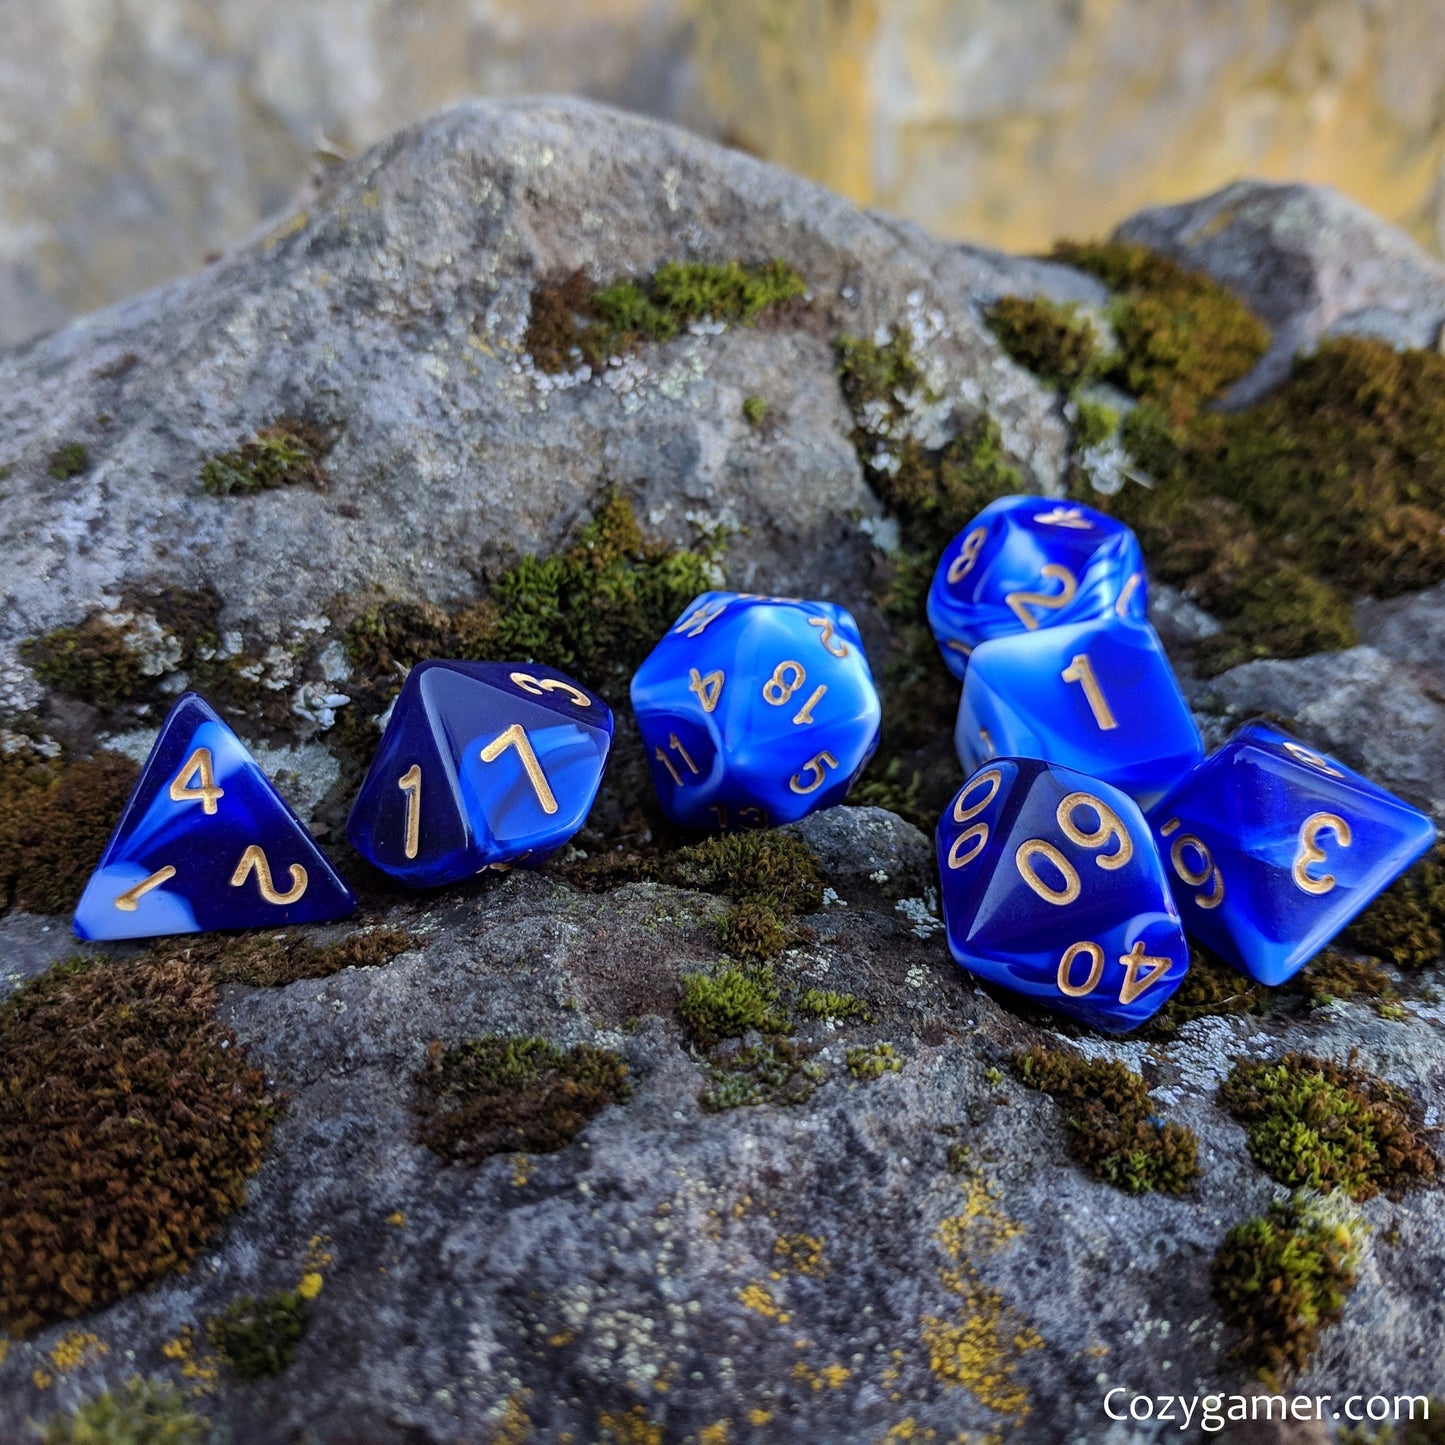 FREE Today: Force Field DnD Dice Set